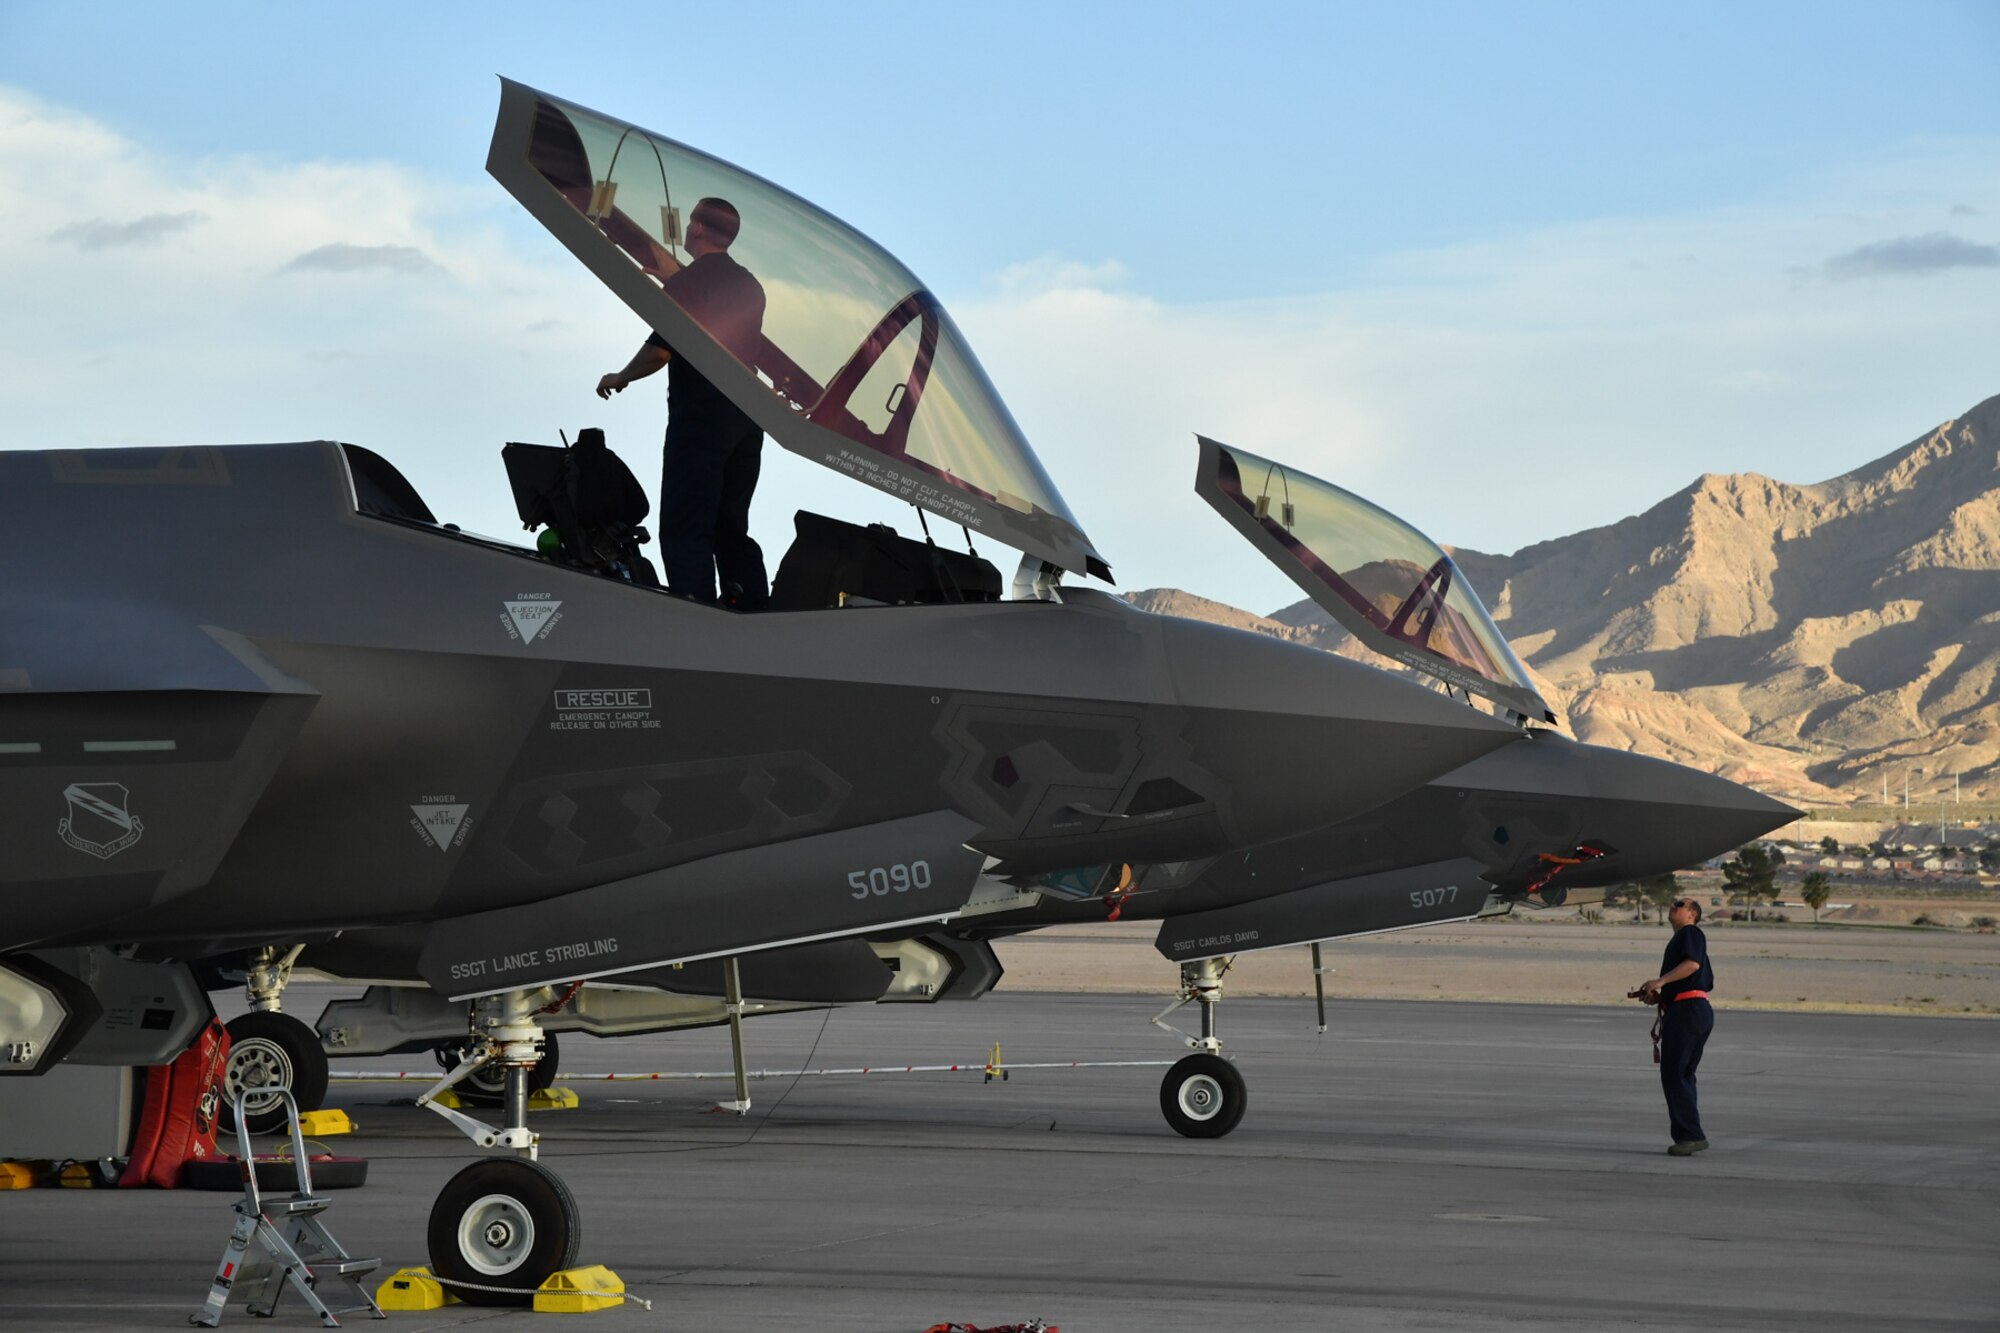 A crew chief from Hill Air Force Base, Utah, works under an F-35 Lightning II aircraft canopy during post-flight maintenance Feb. 7 during Red Flag 17-1 at Nellis Air Force Base, Nevada. (U.S. Air Force photo by R. Nial Bradshaw)